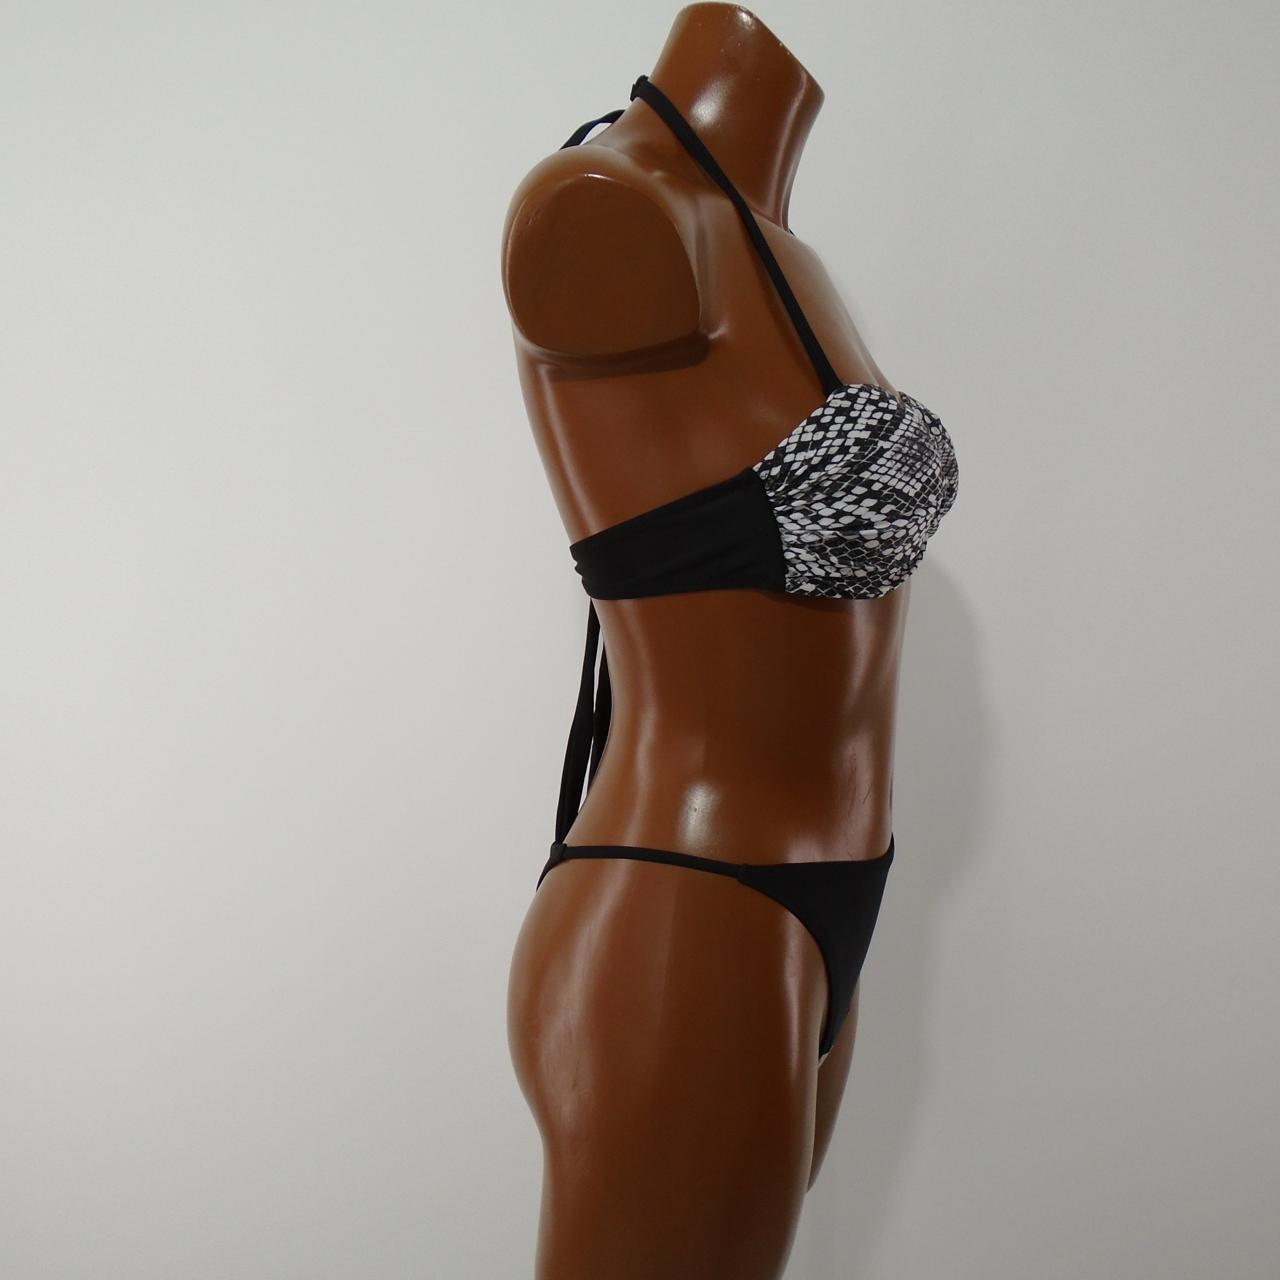 Women's Swimsuit PrettyLittleThing. Black. S. New with tags